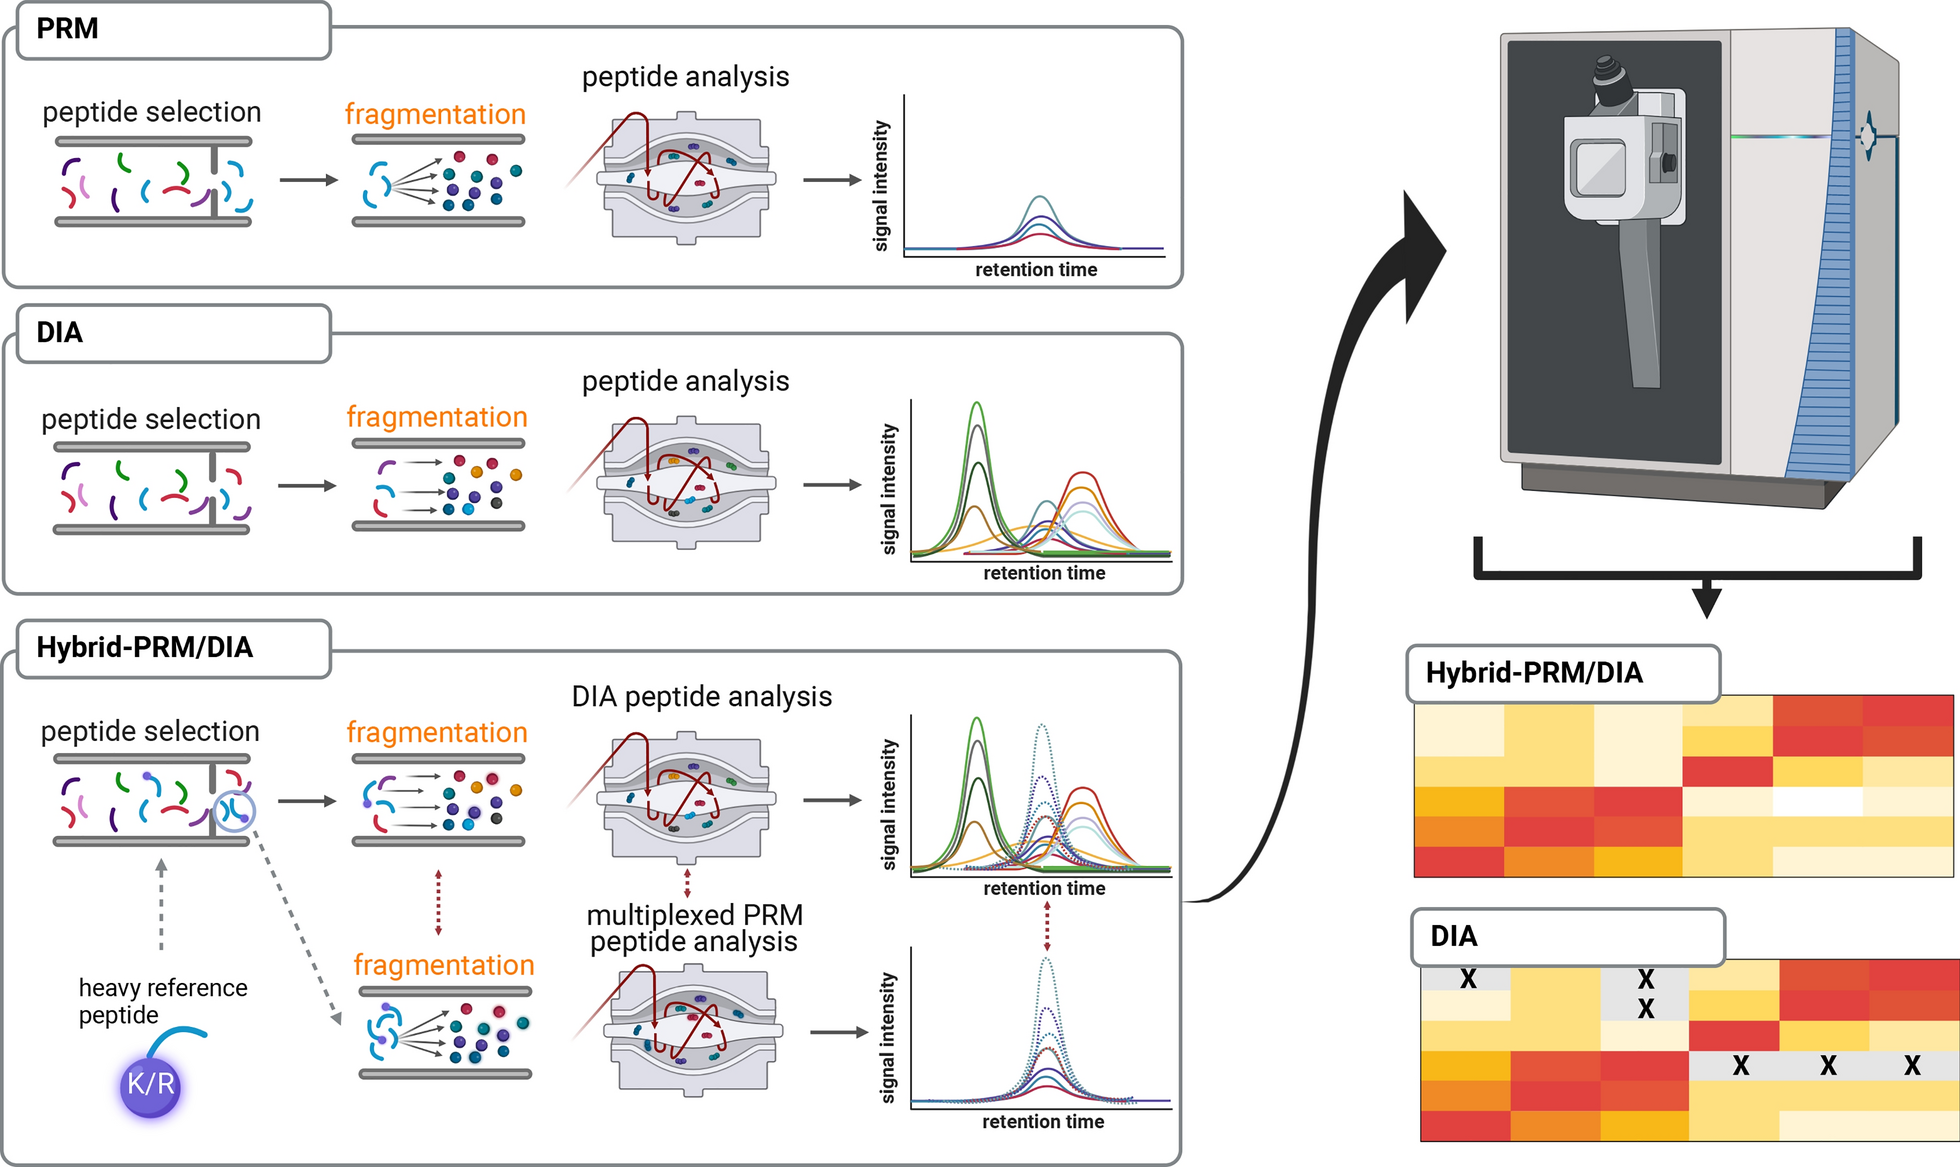 Simultaneous targeted and discovery-driven clinical proteotyping using hybrid-PRM/DIA